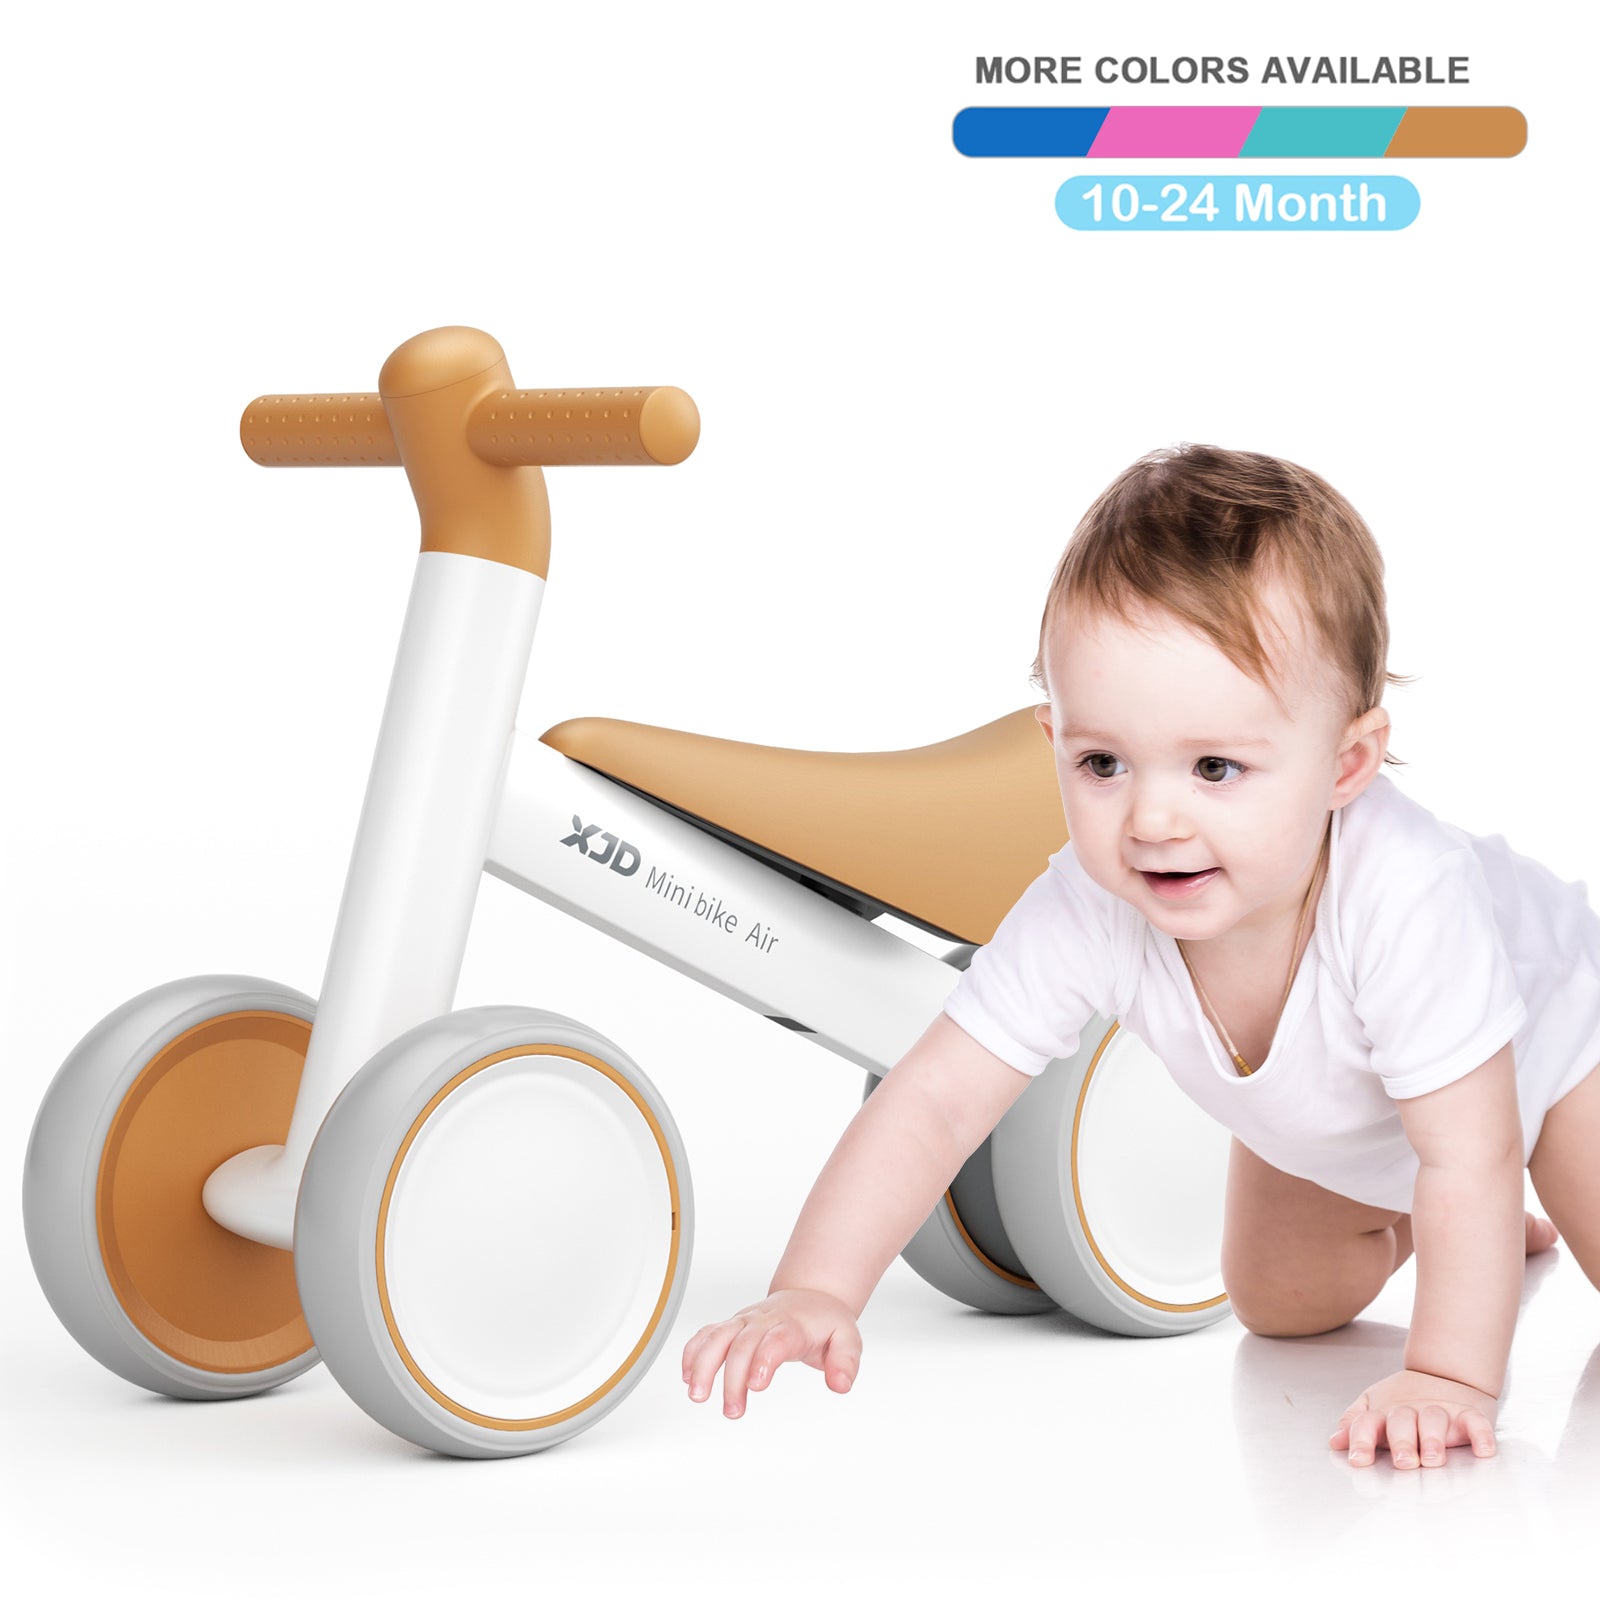 Rolling Into Joy: Why a Balance Bike Is the Ultimate Black Friday Gift for Your Kids